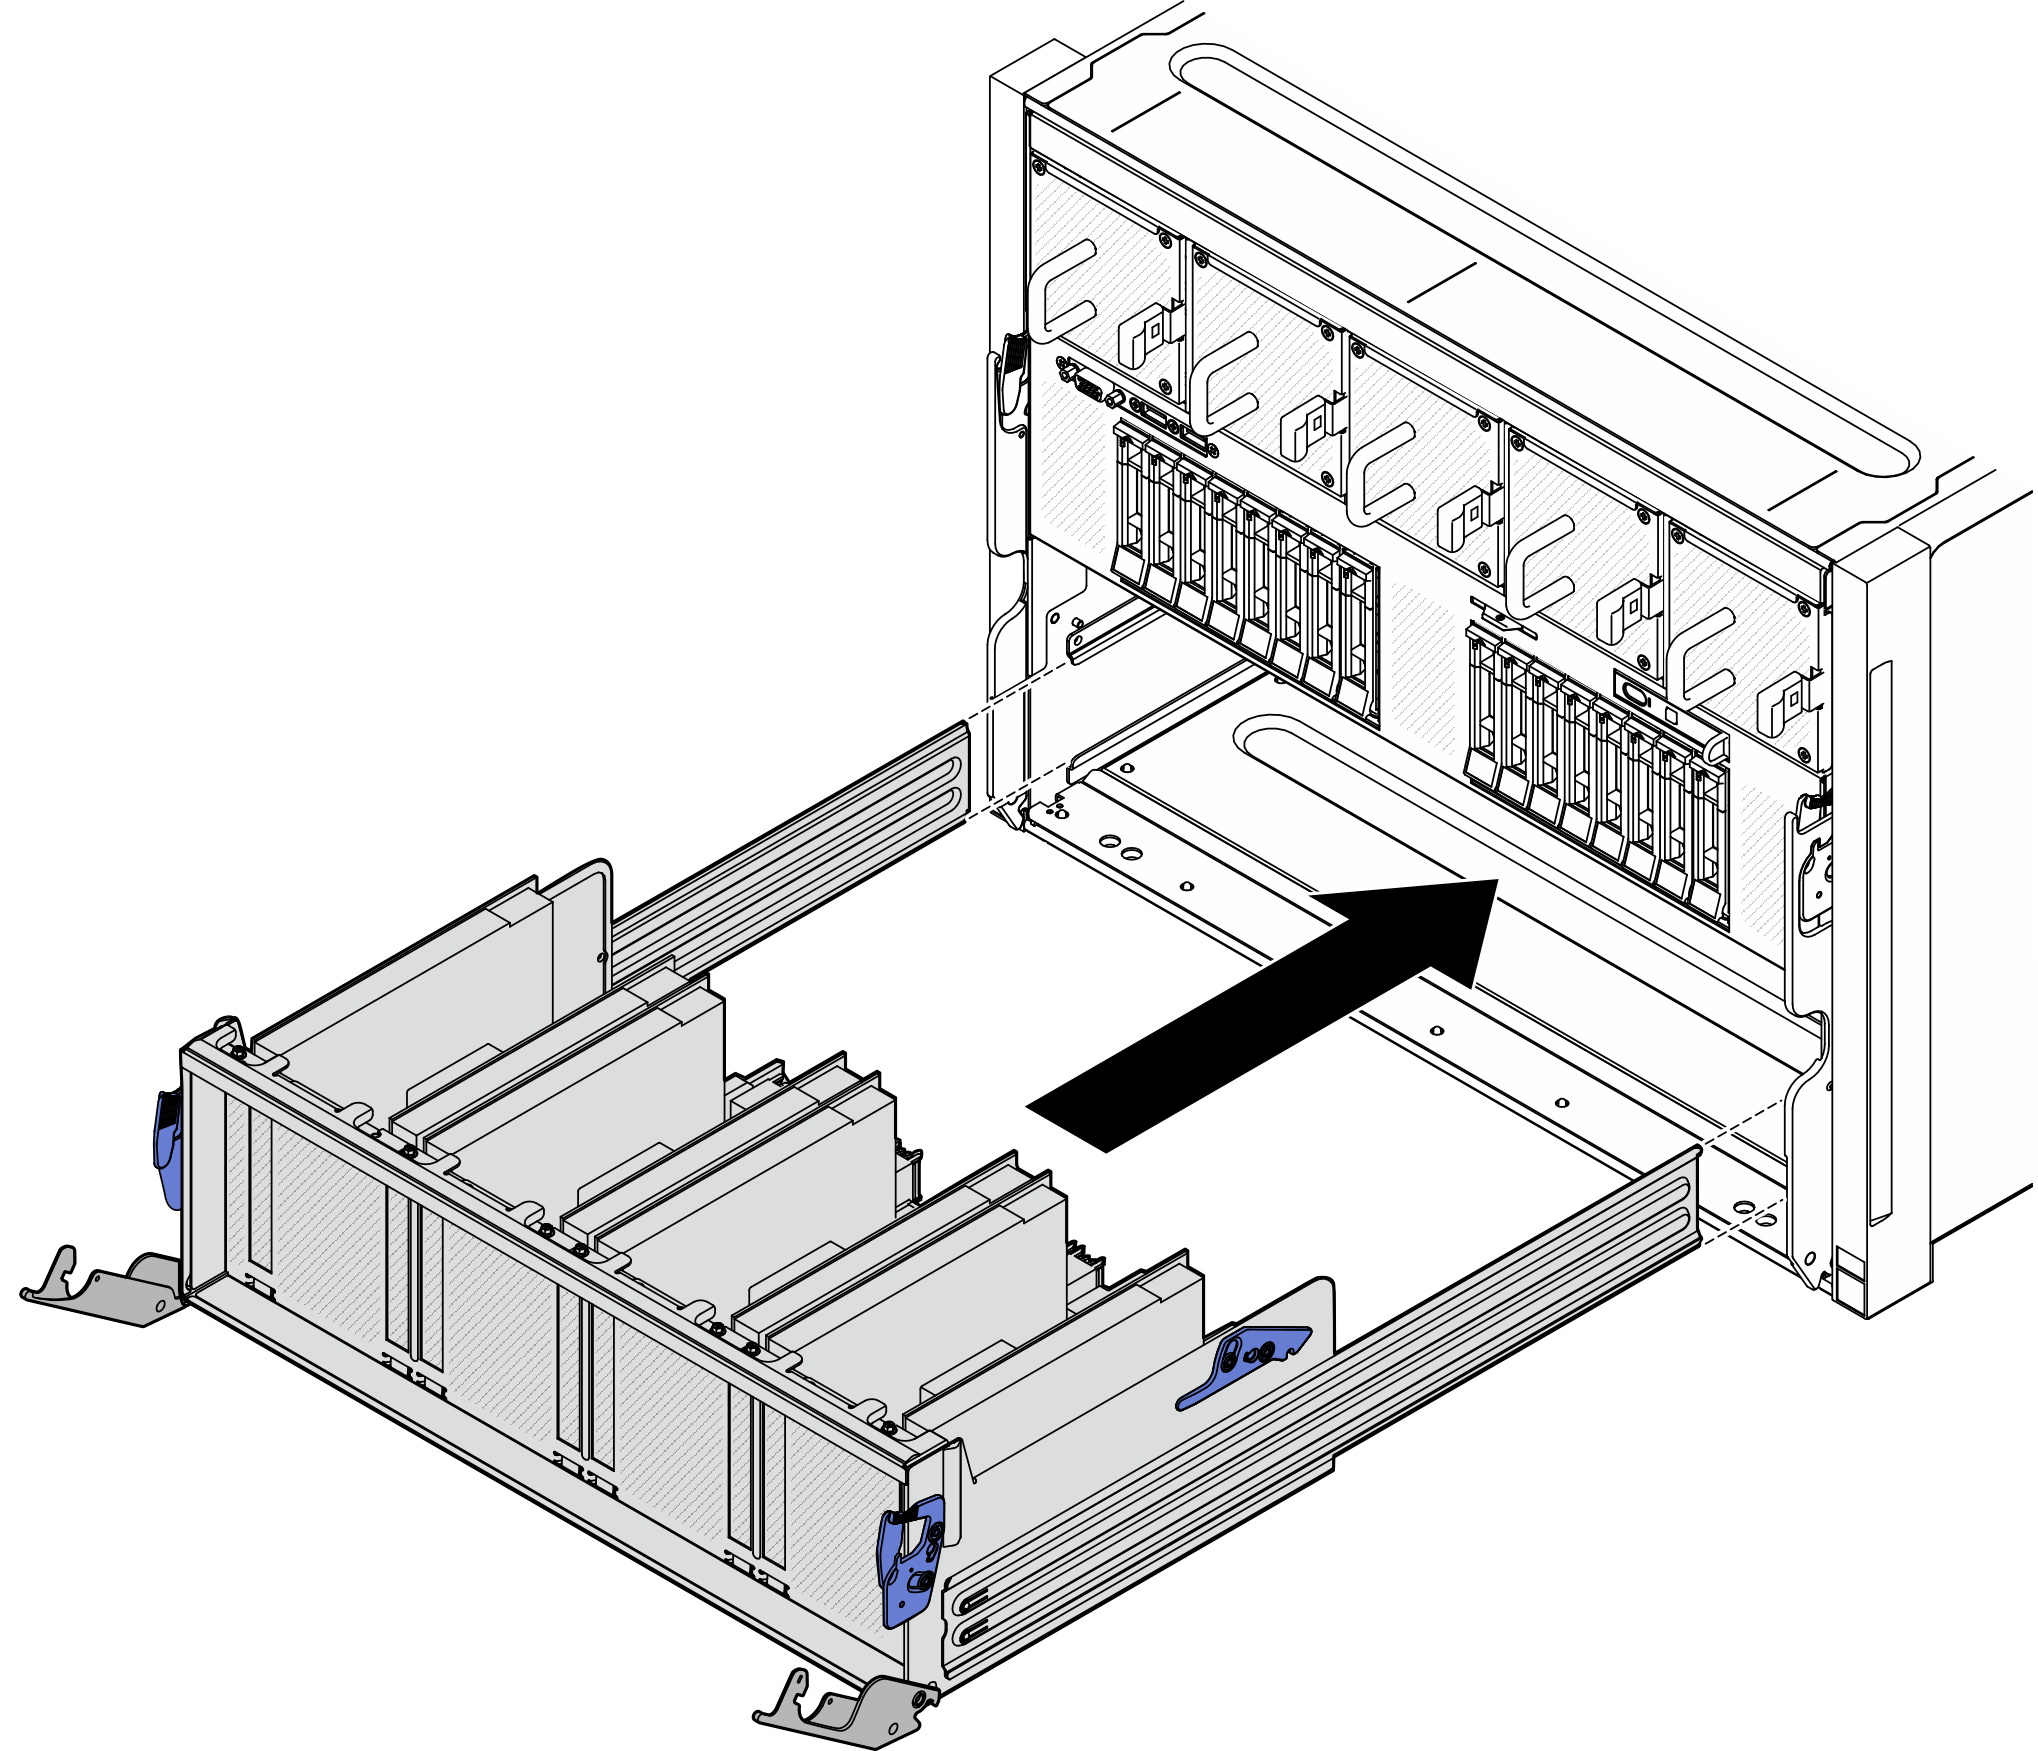 PCIe-Switch-Shuttle installation to stop position